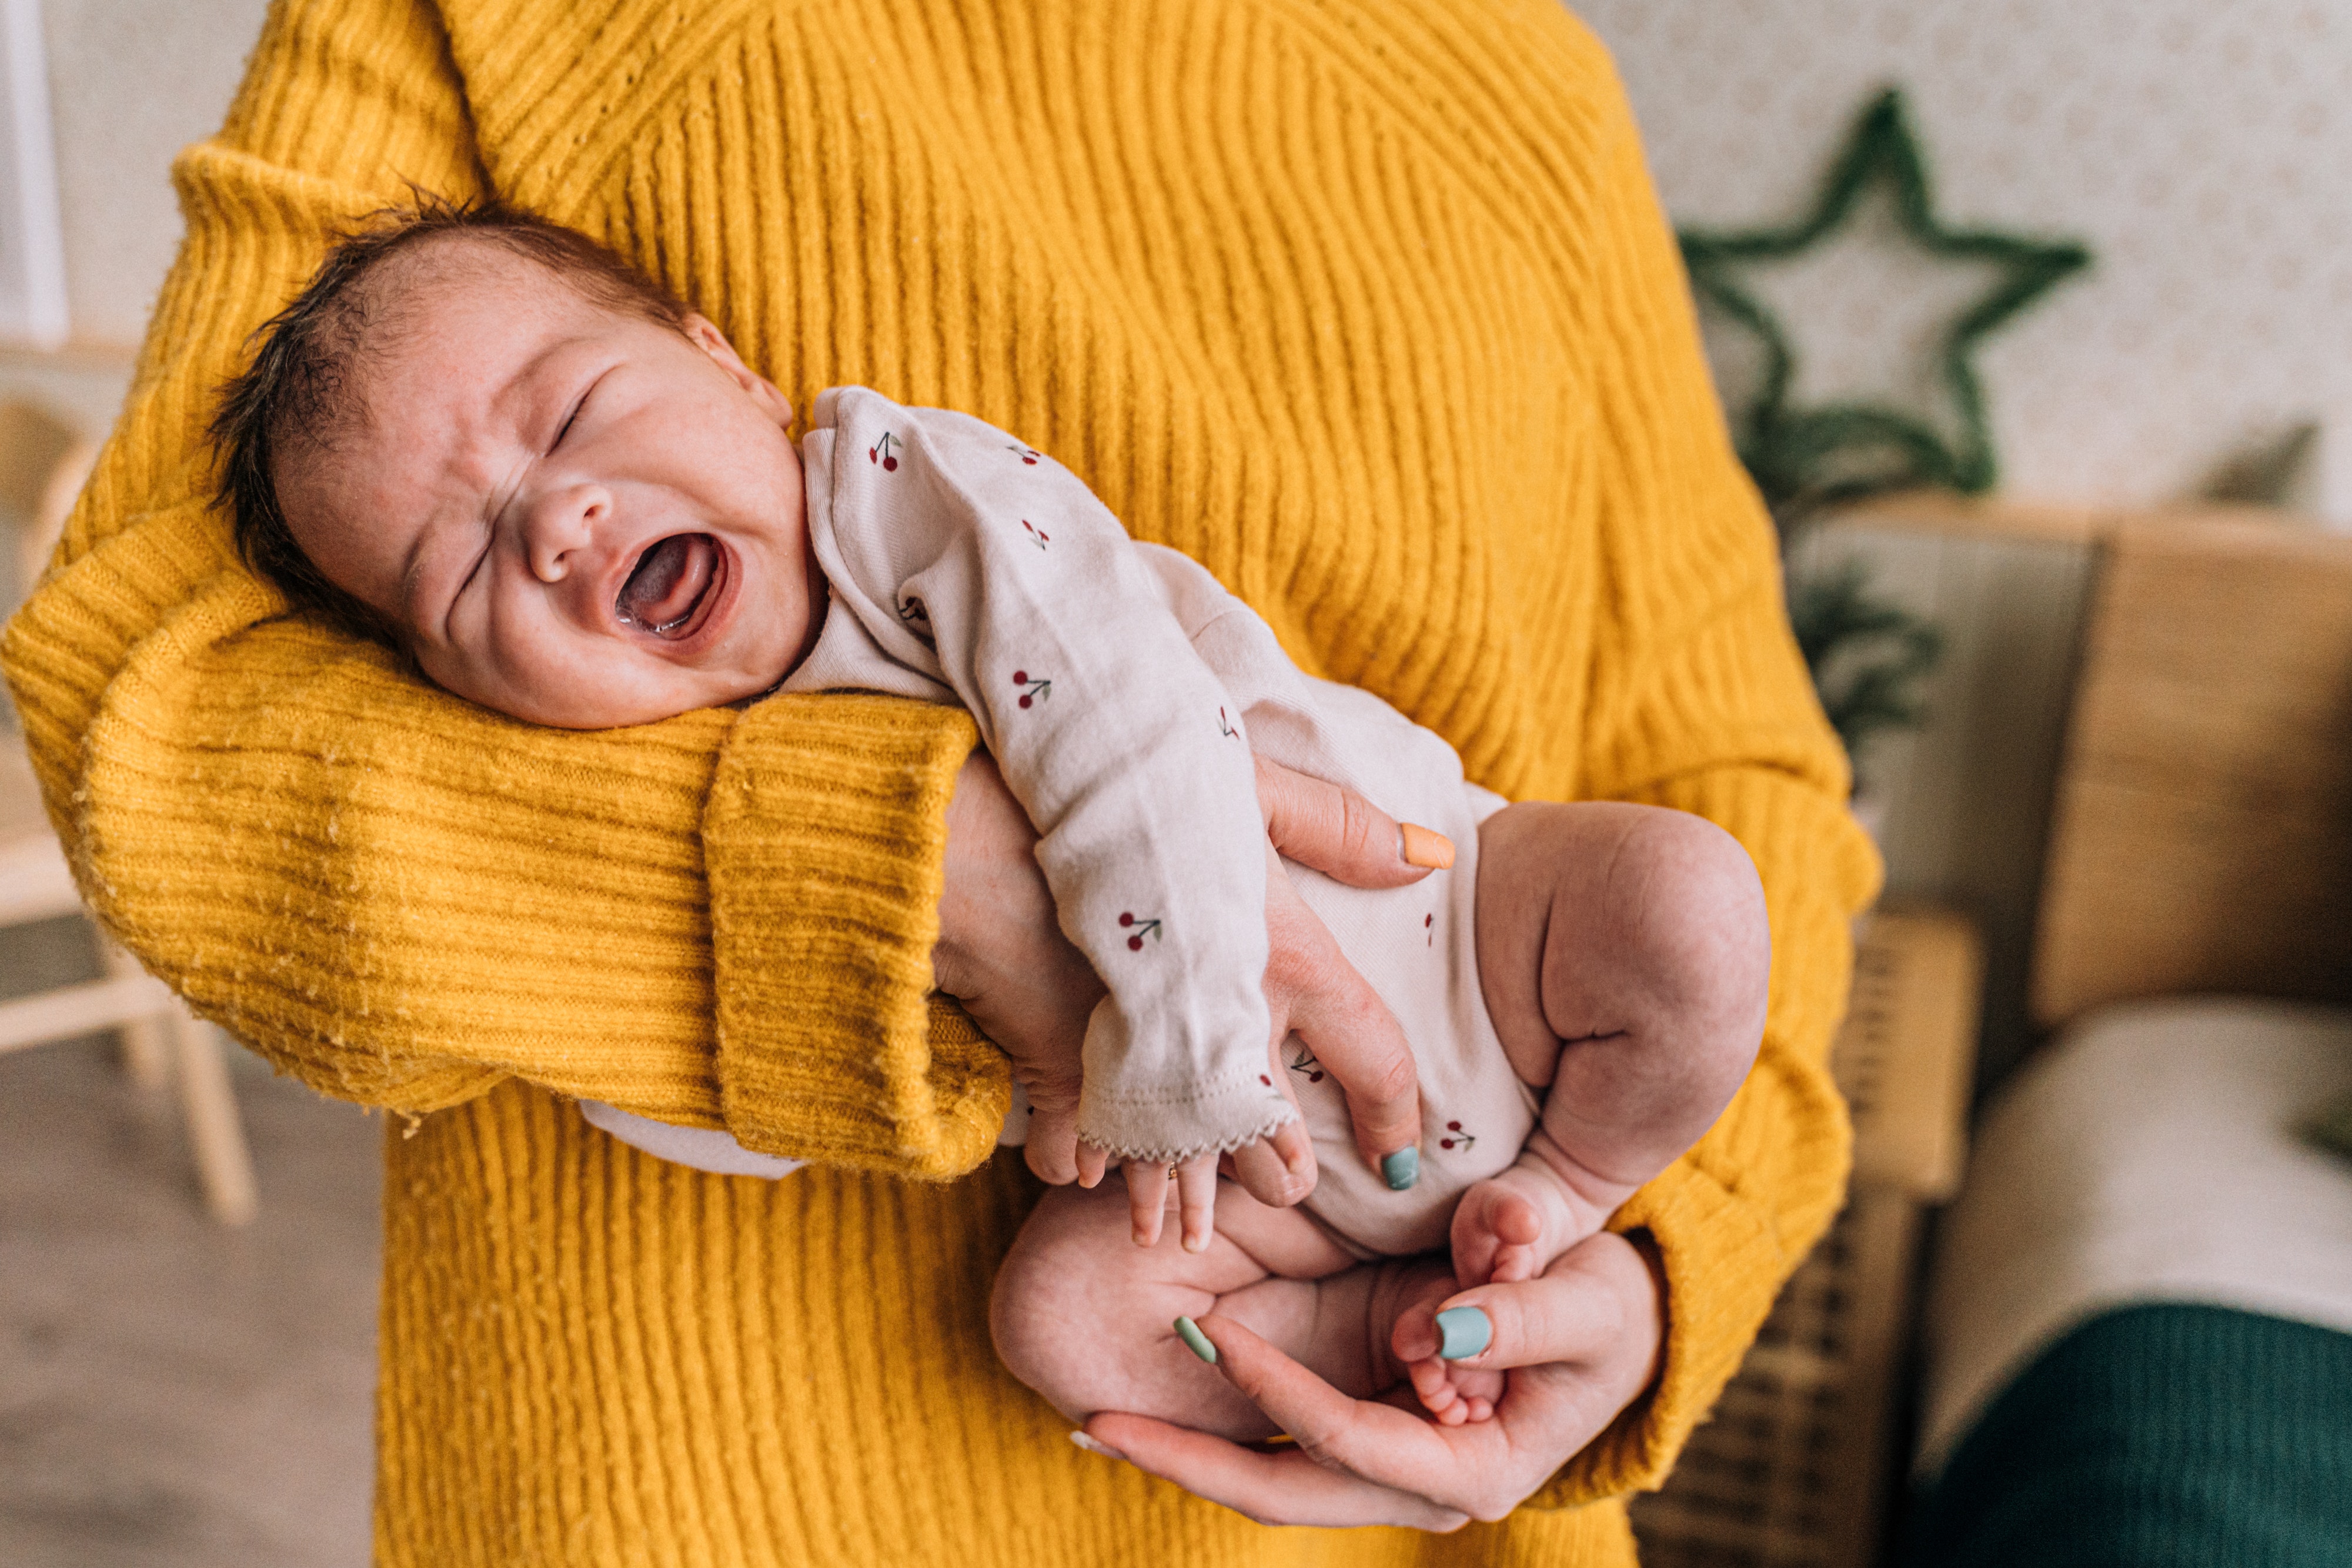 Crying baby | Source: Pexels